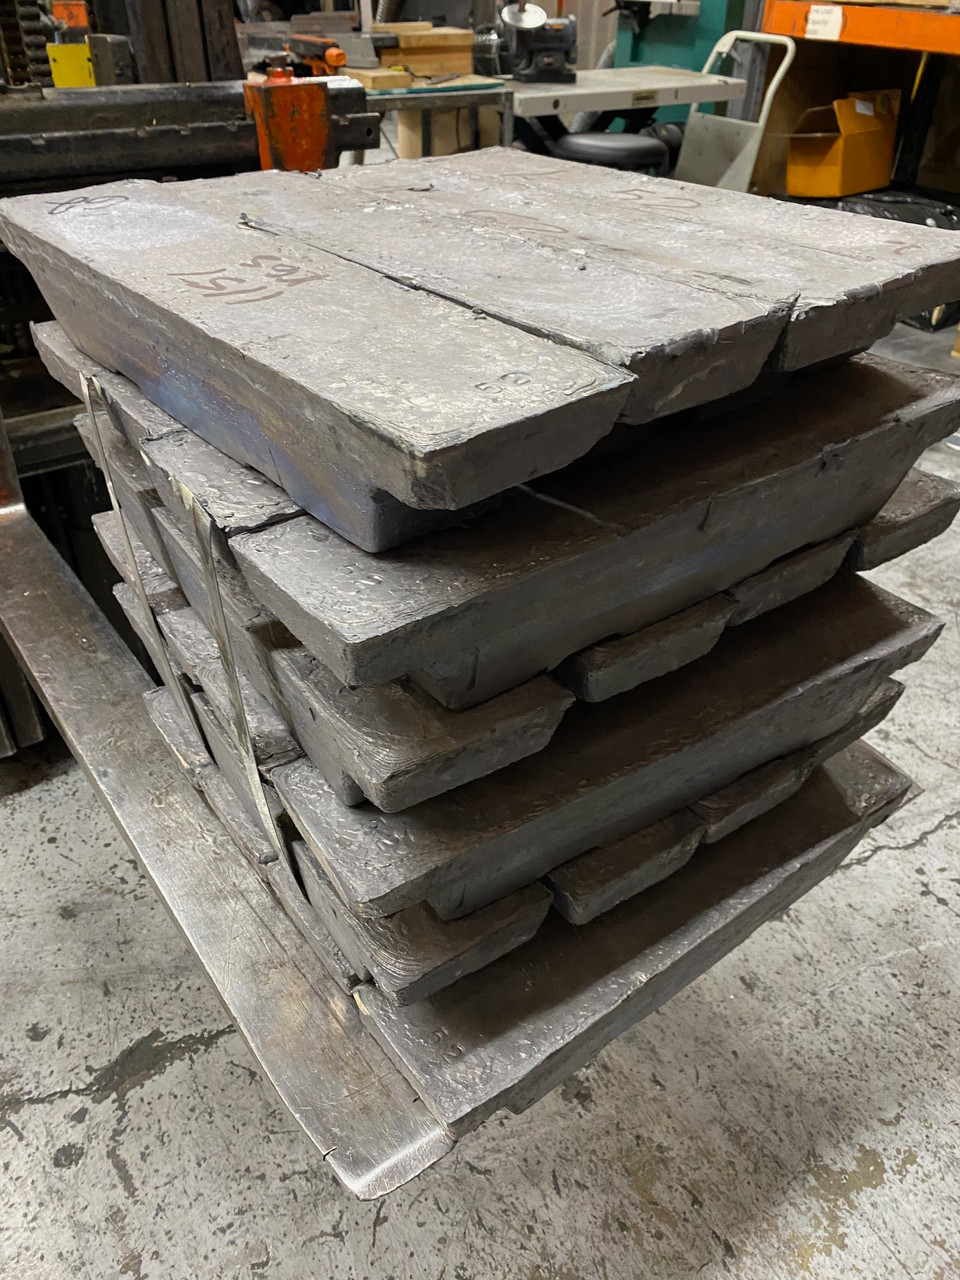 Pallet Lead Ingots (99.9%) 1000 pounds Freight Included - RotoMetals